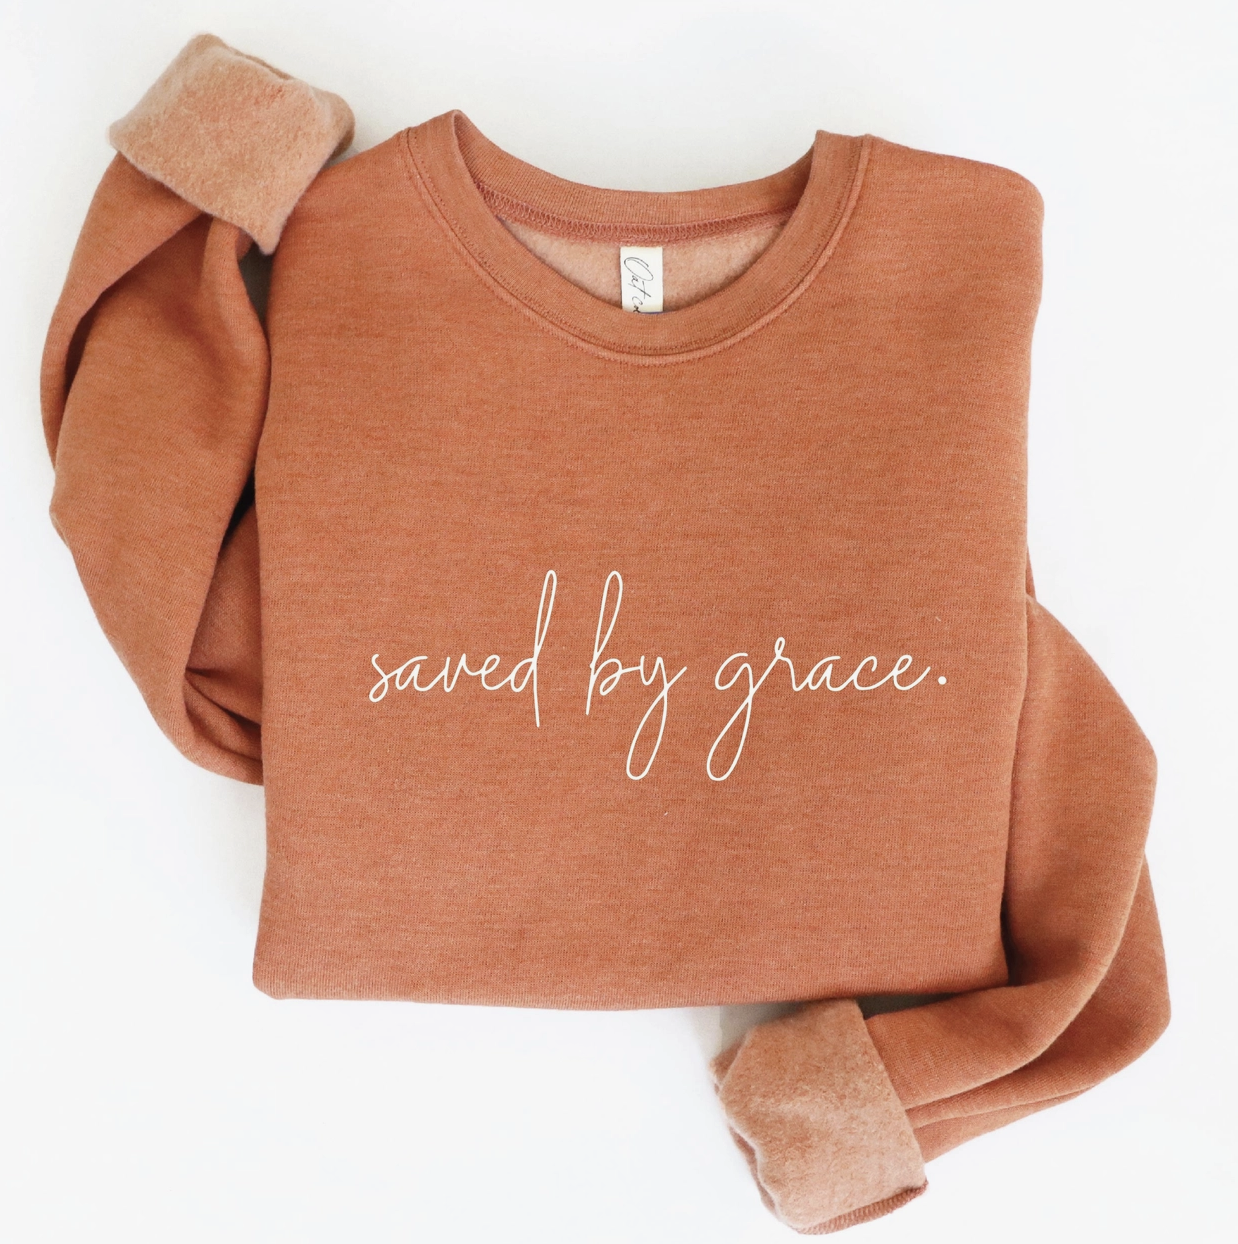 Oat Collective "Saved By Grace" Sweatshirt, Autumn Leaf - XL